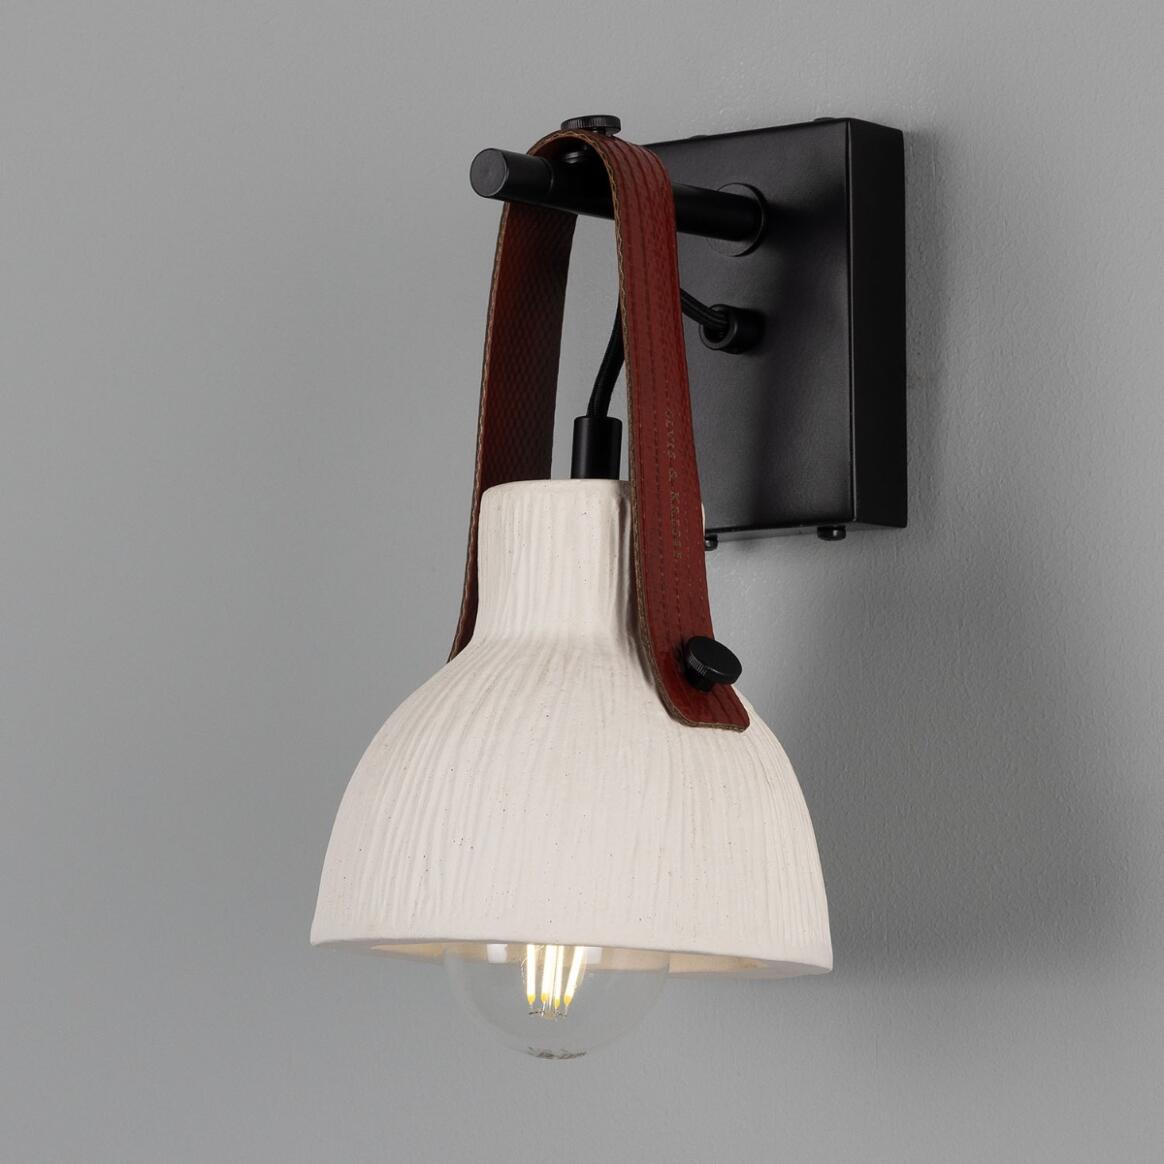 Nagi Organic Ceramic Wall Light with Rescued Fire-Hose Strap, Matte White Striped main product image